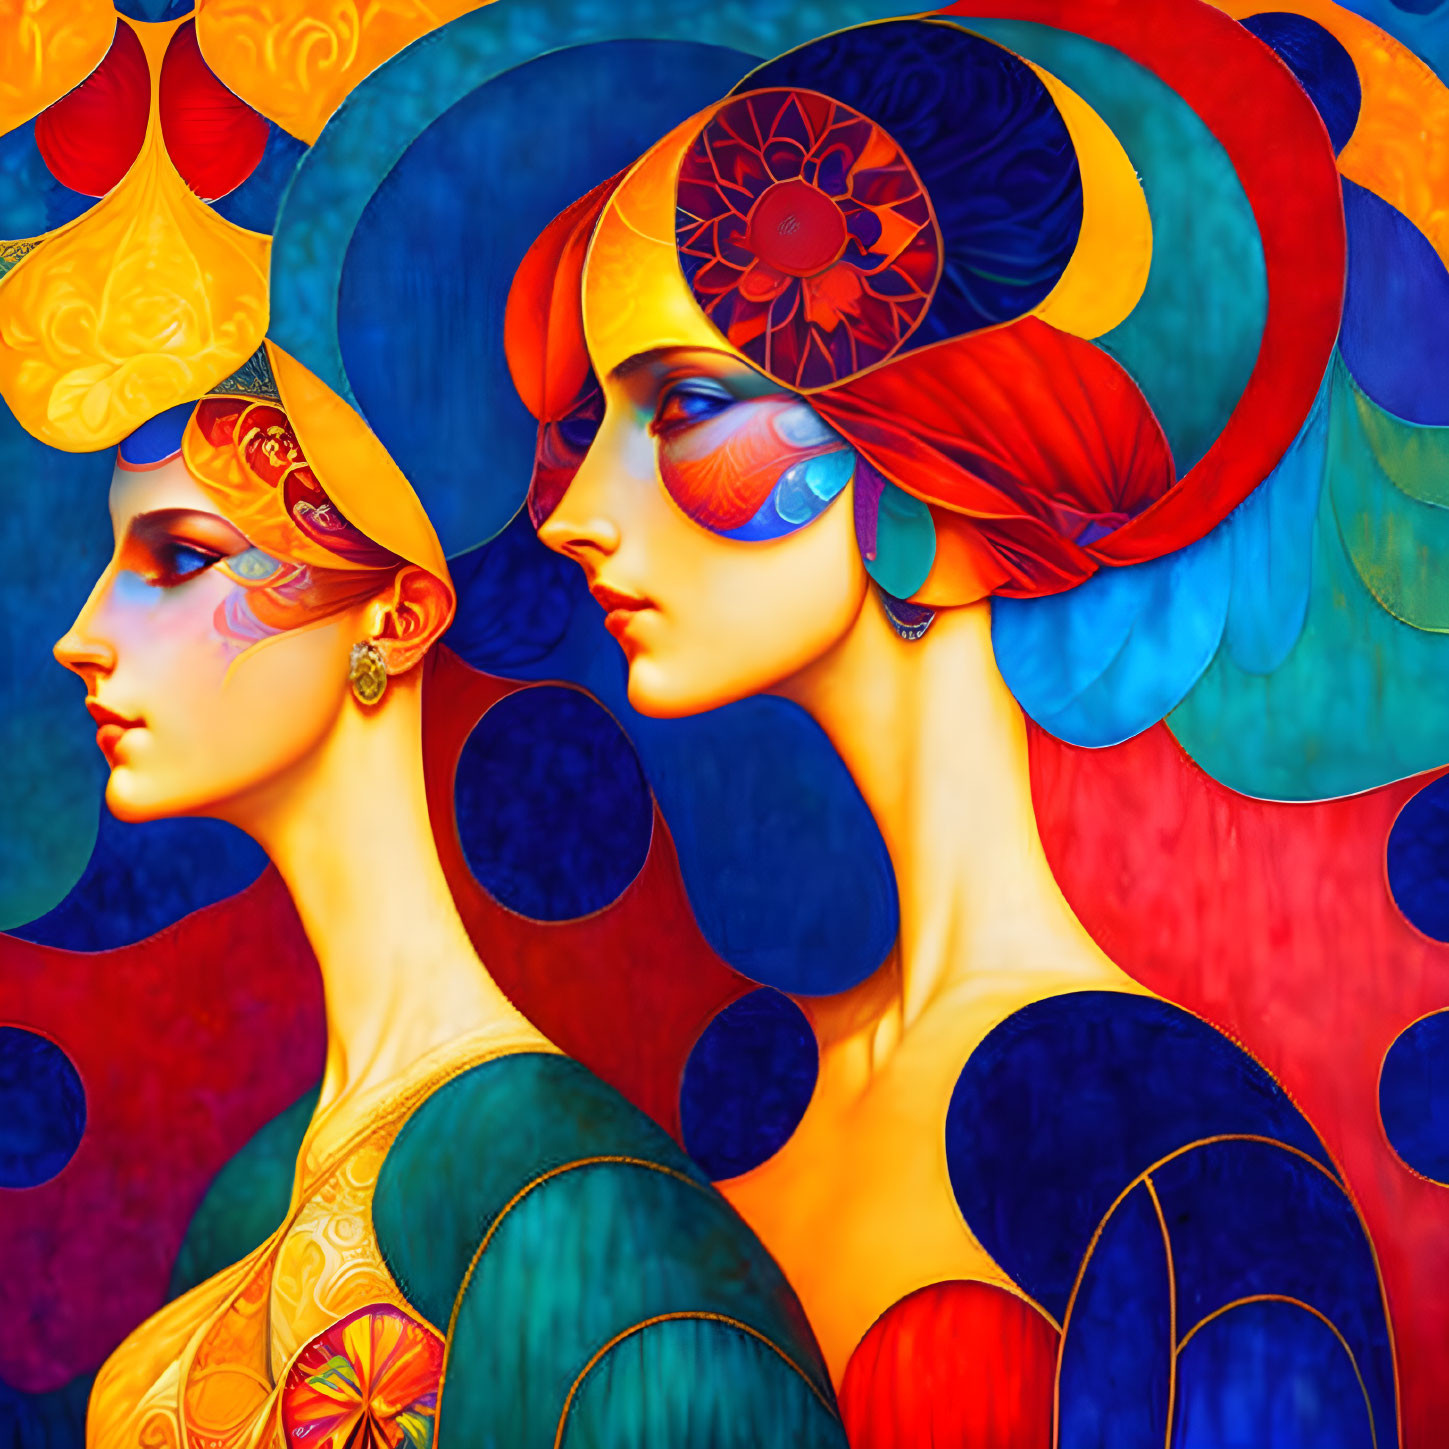 Colorful side profiles of two women with elaborate headdresses on patterned background